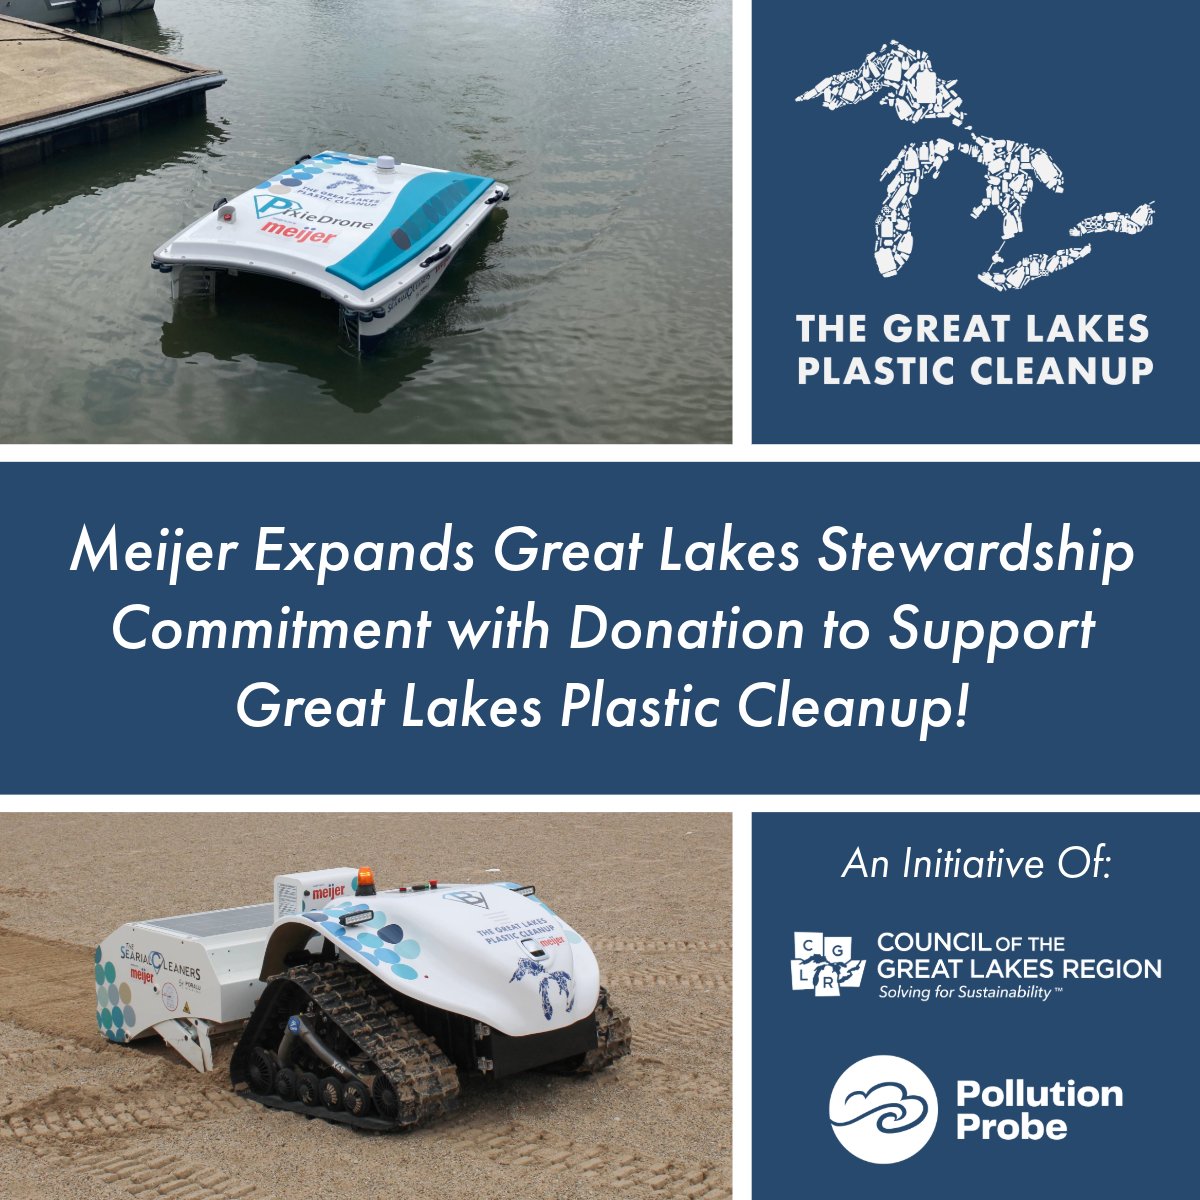 Midwest retailer @Meijer is continuing its commitment to #GreatLakes stewardship with a $250,000 donation to support the GLPC!

The donation brings a new BeBot and PixieDrone to @mkeriverkeeper.

Learn more: bit.ly/4aCPeaW

#GLPCleanup #BeatPlasticPollution